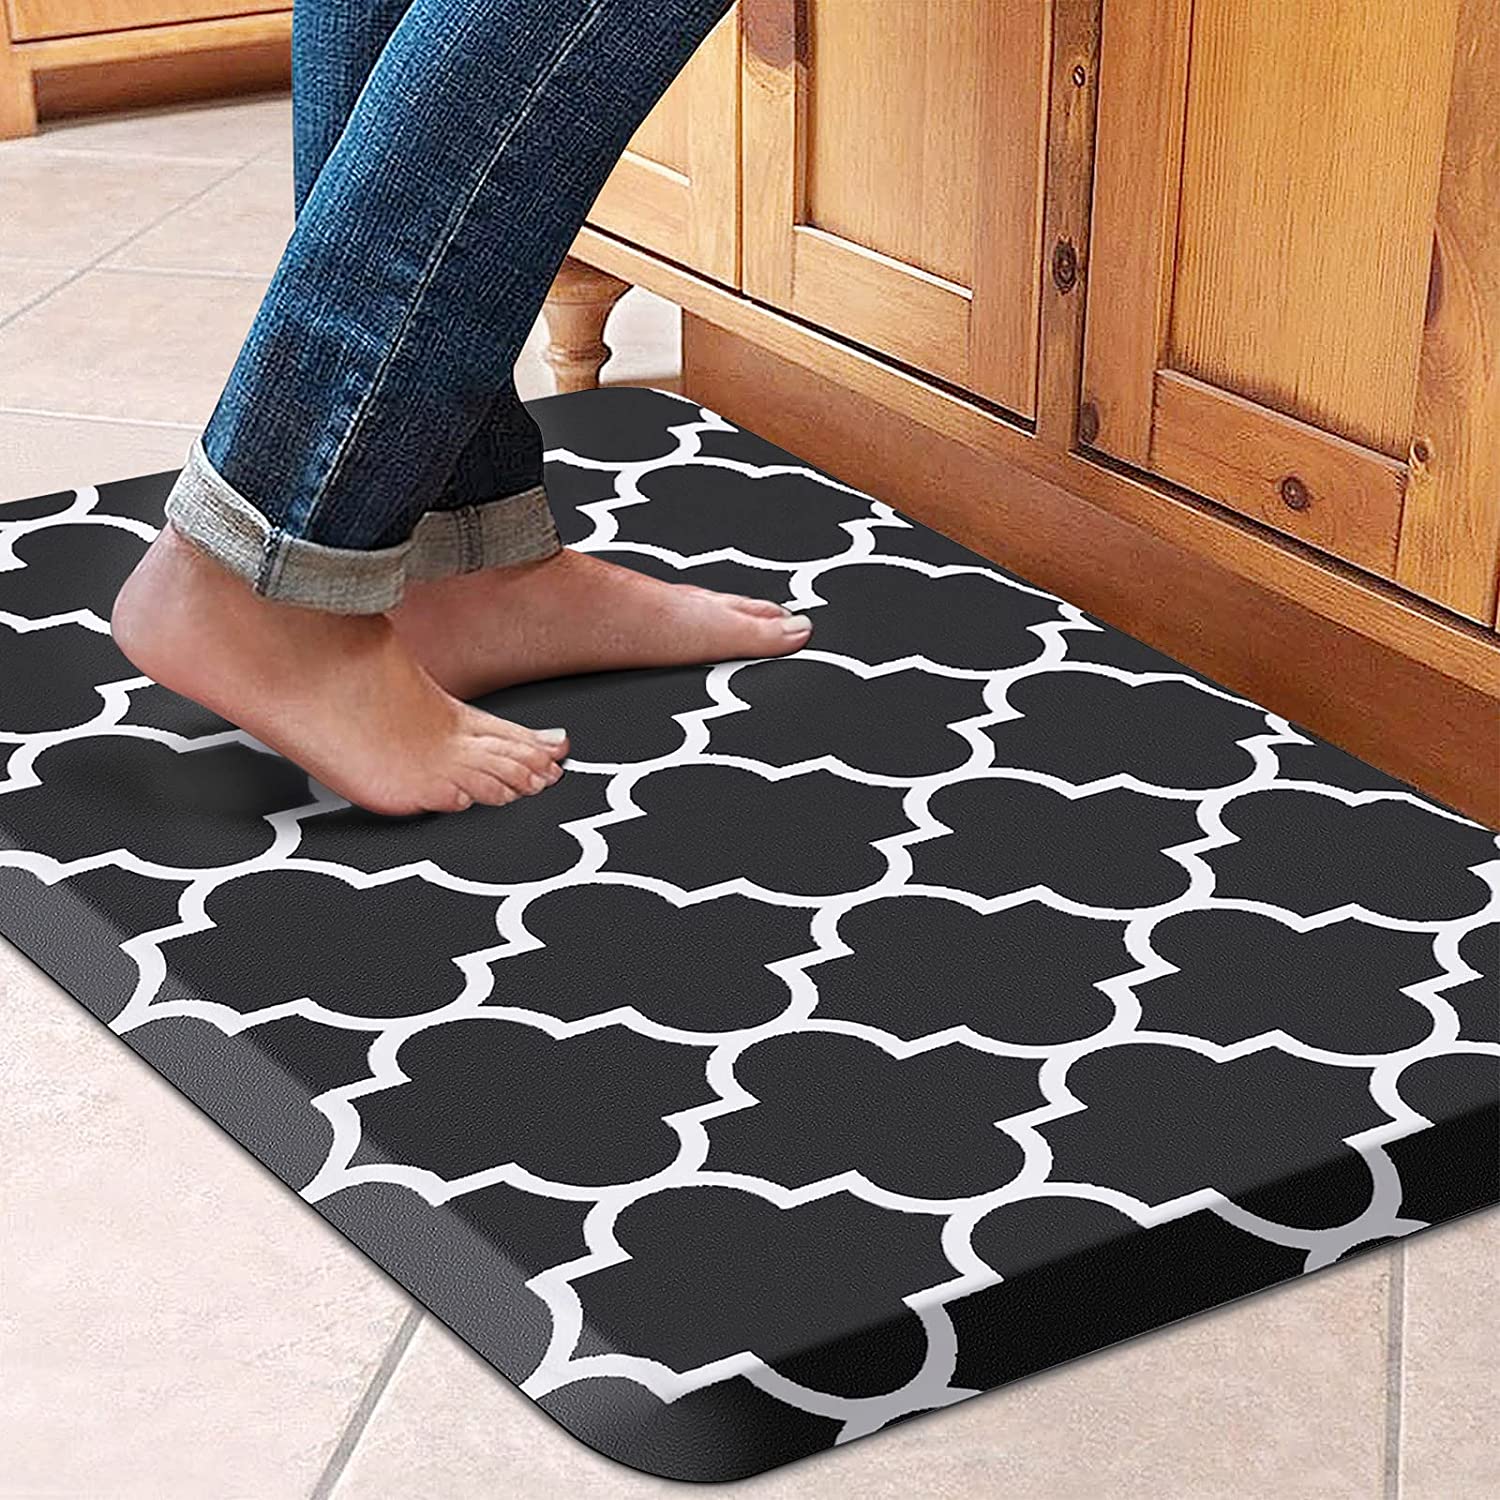 WISELIFE Water Resistant Non-Skid Standing Mat